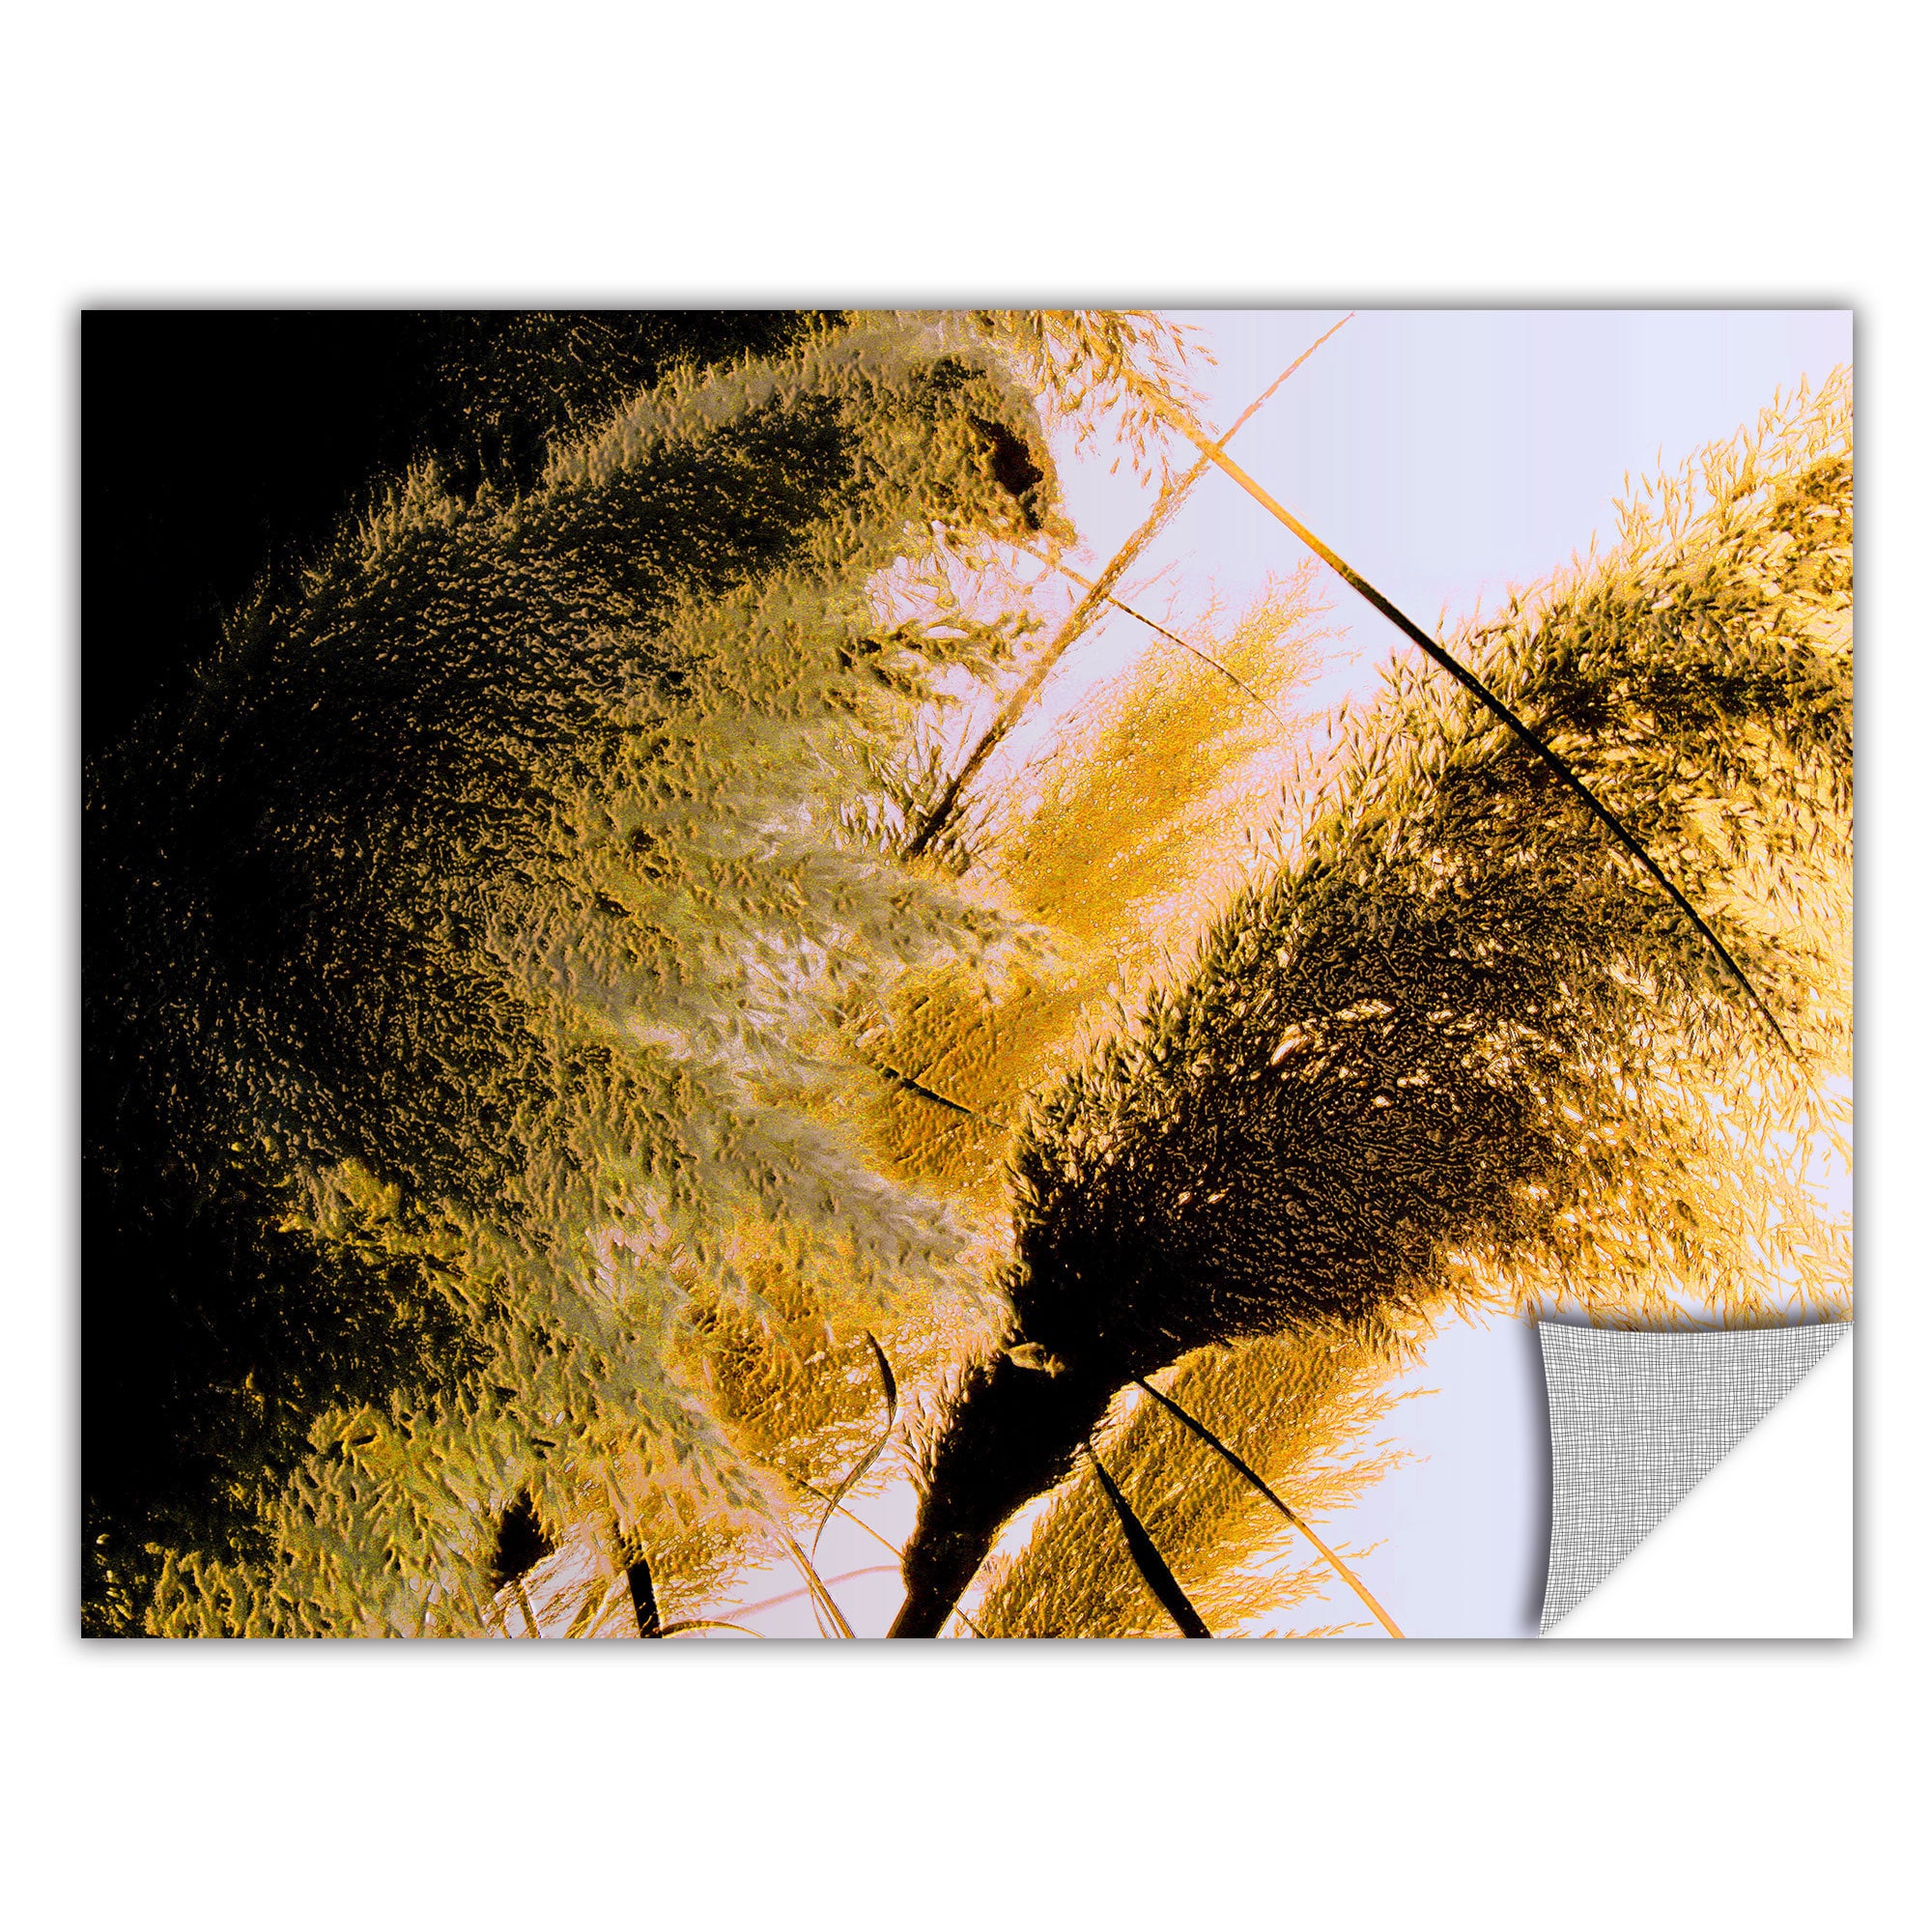 ArtWall Artapeelz Dean Uhlinger August Pampas Removable Graphic Wall Art 24 by 32-Inch